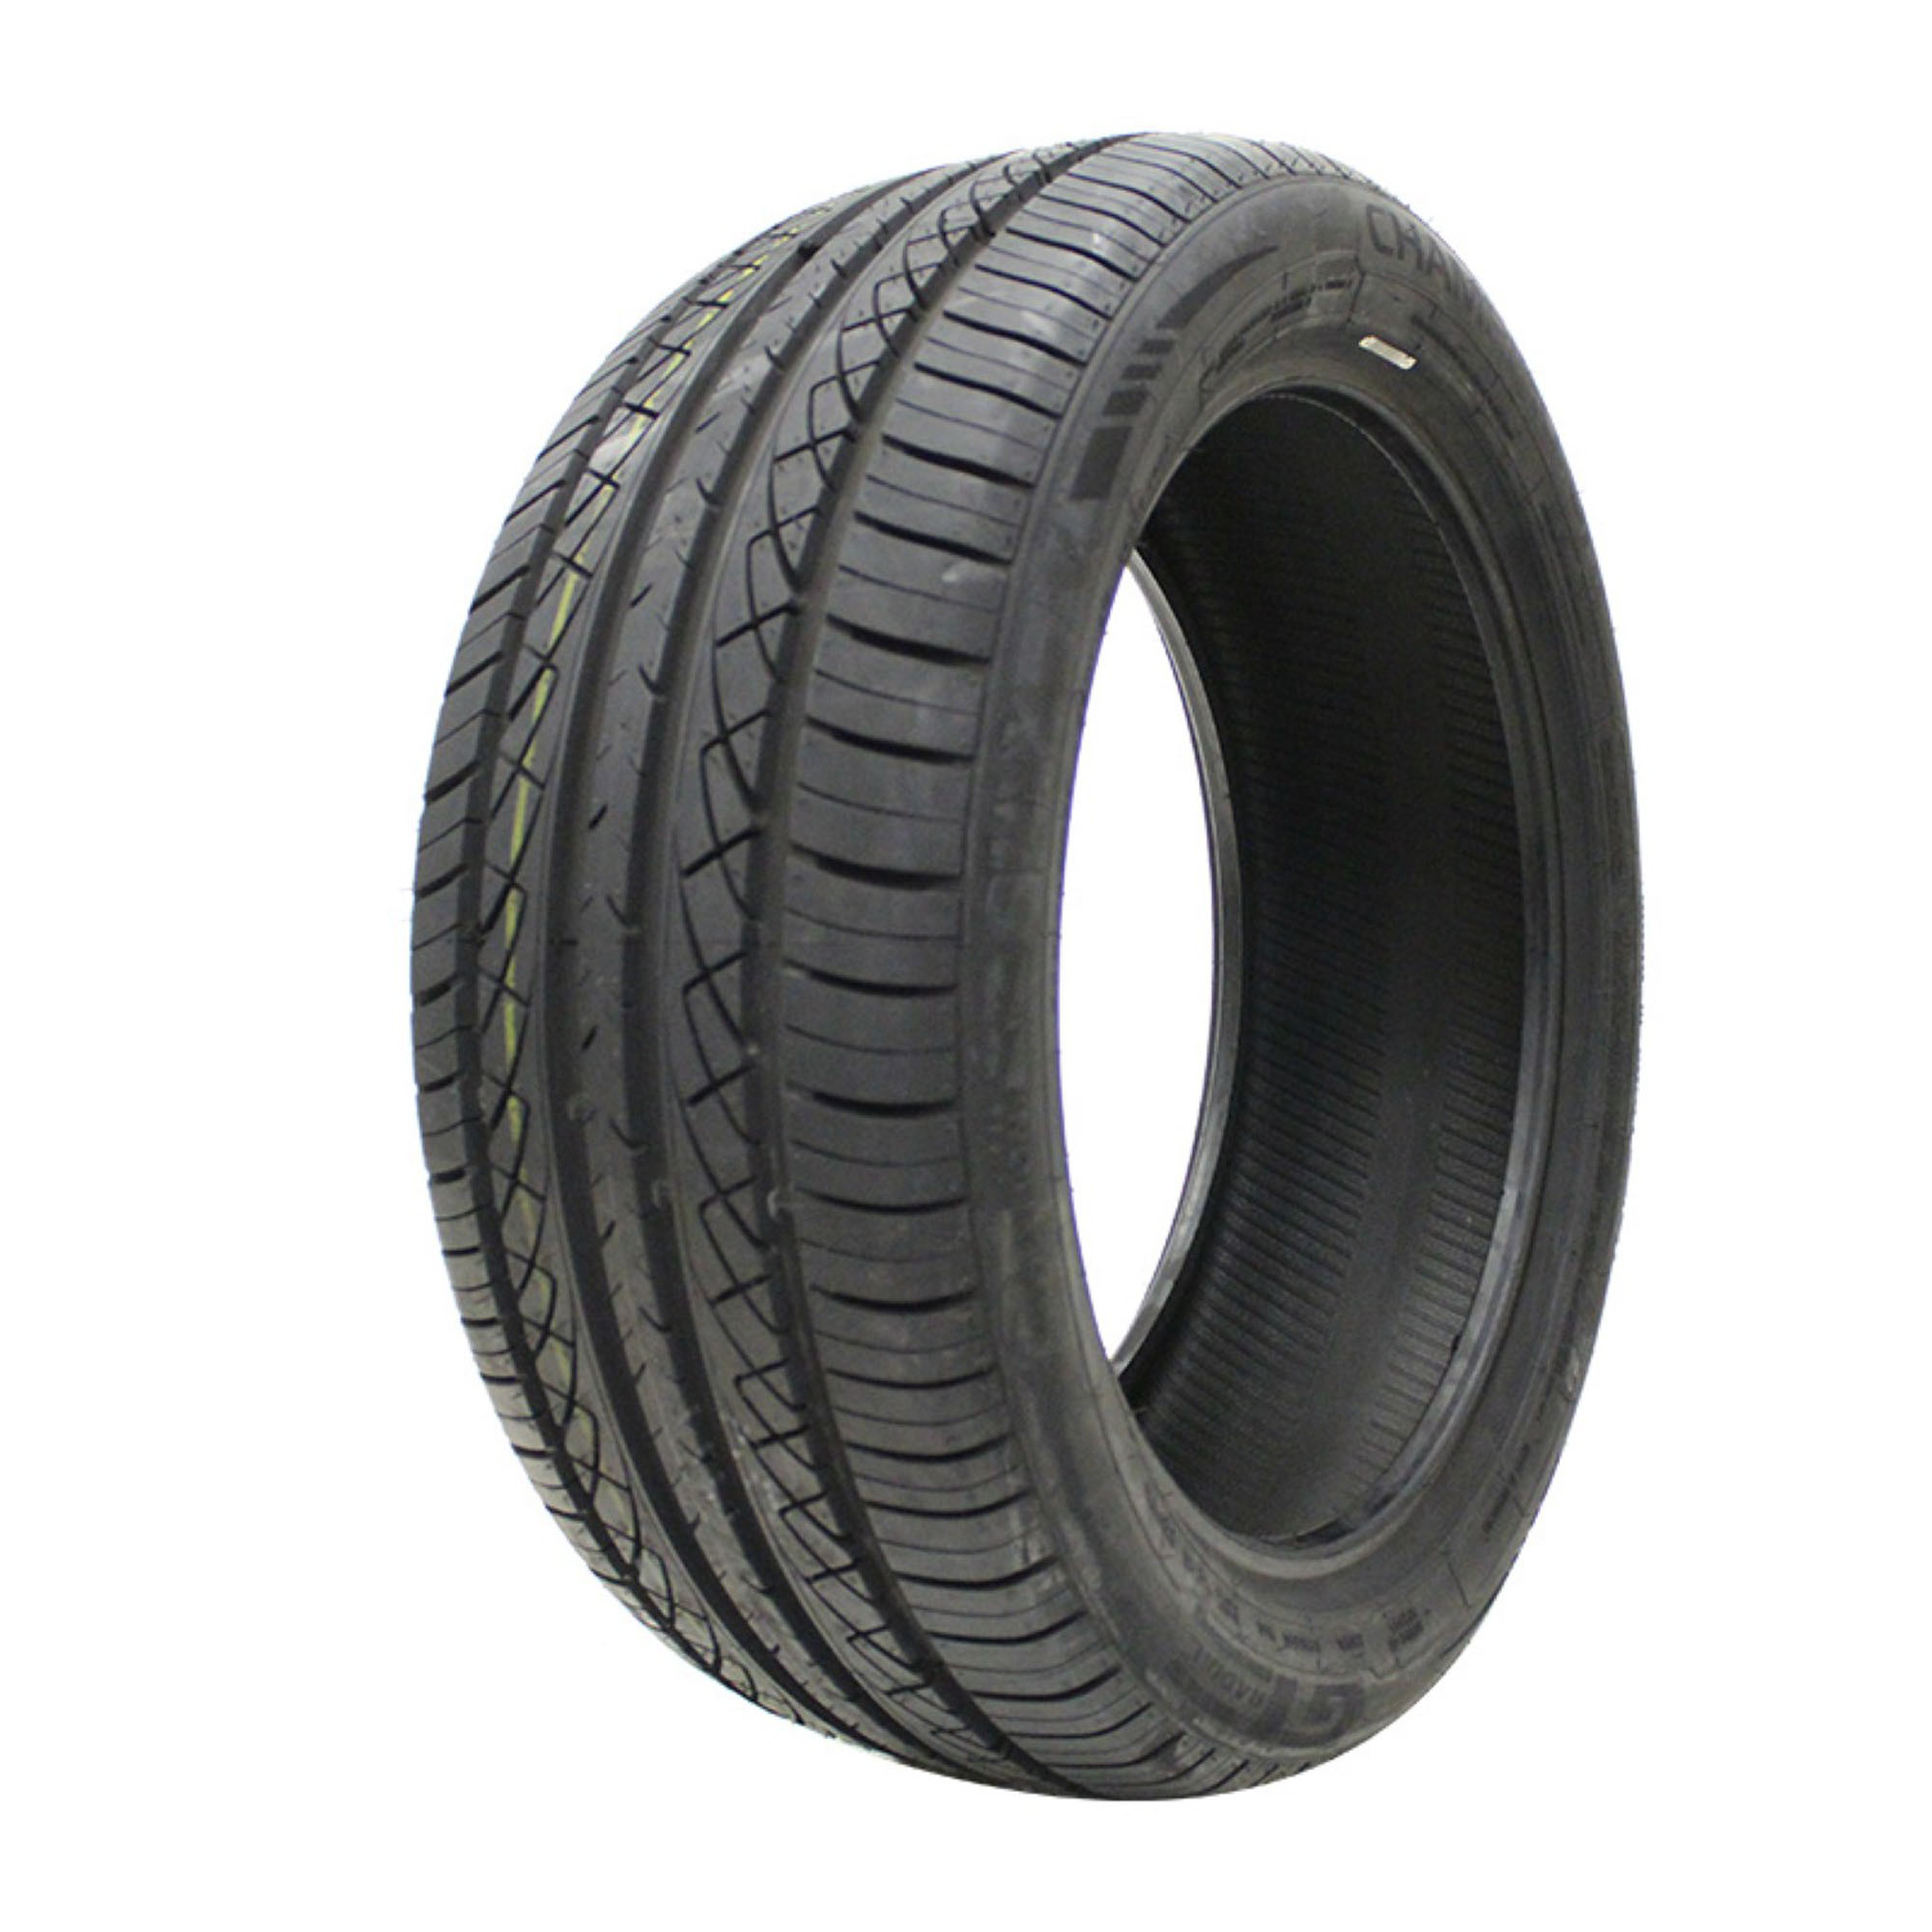 GT Radial Champiro UHP A/S UHP All Season 225/50ZR18 95W Passenger Tire - image 1 of 6